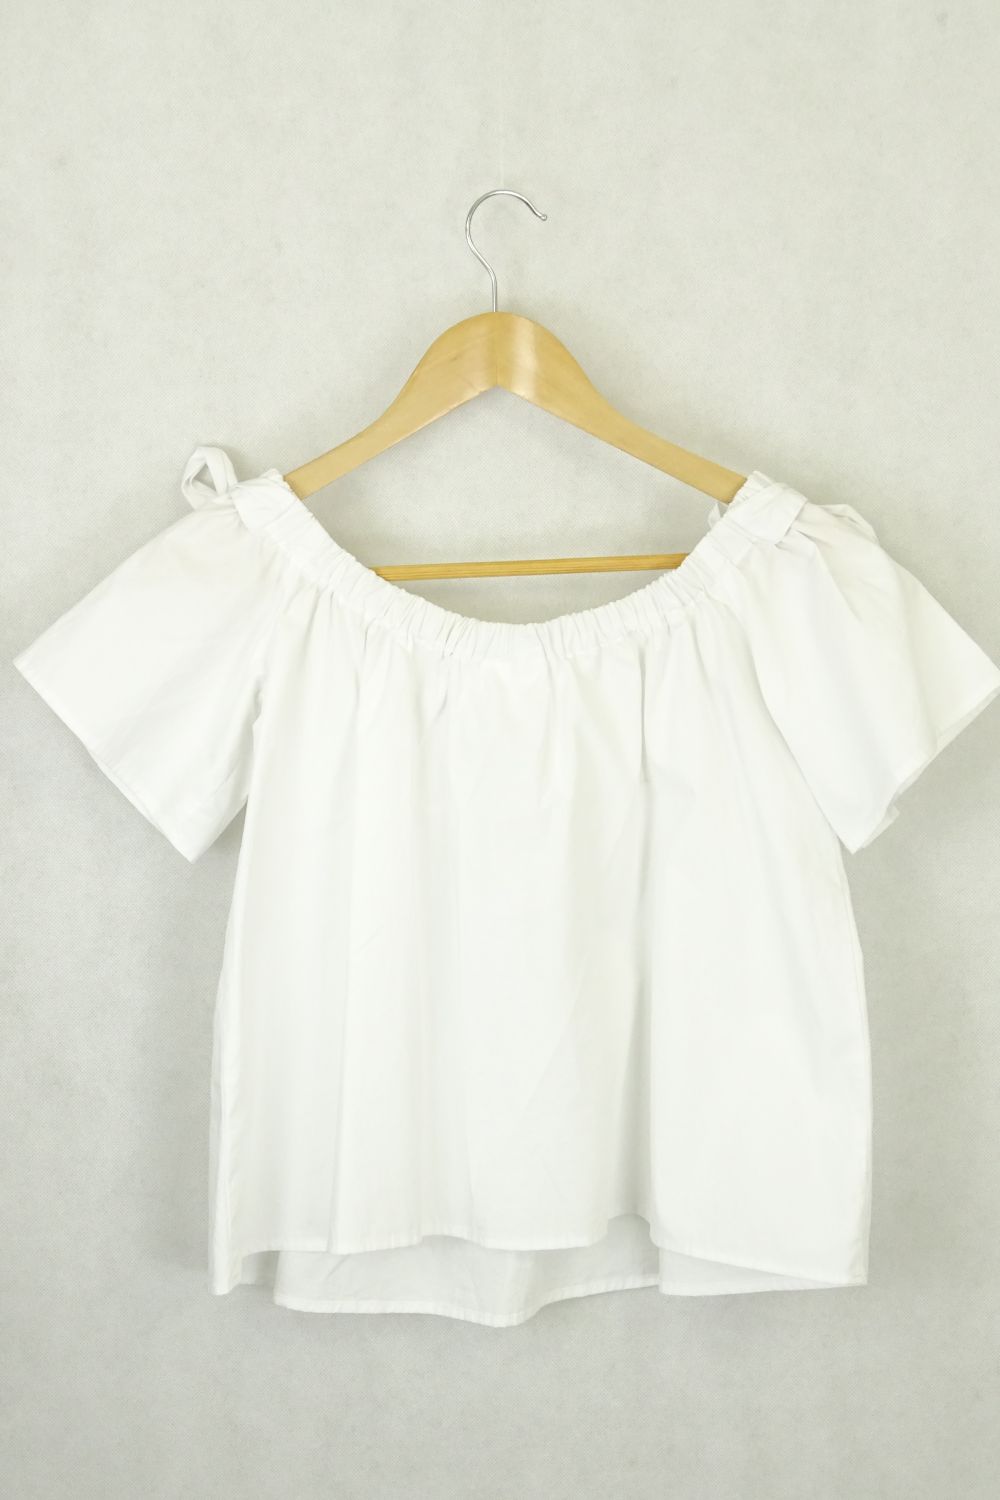 Seed Off the Shoulder White Shirt- S